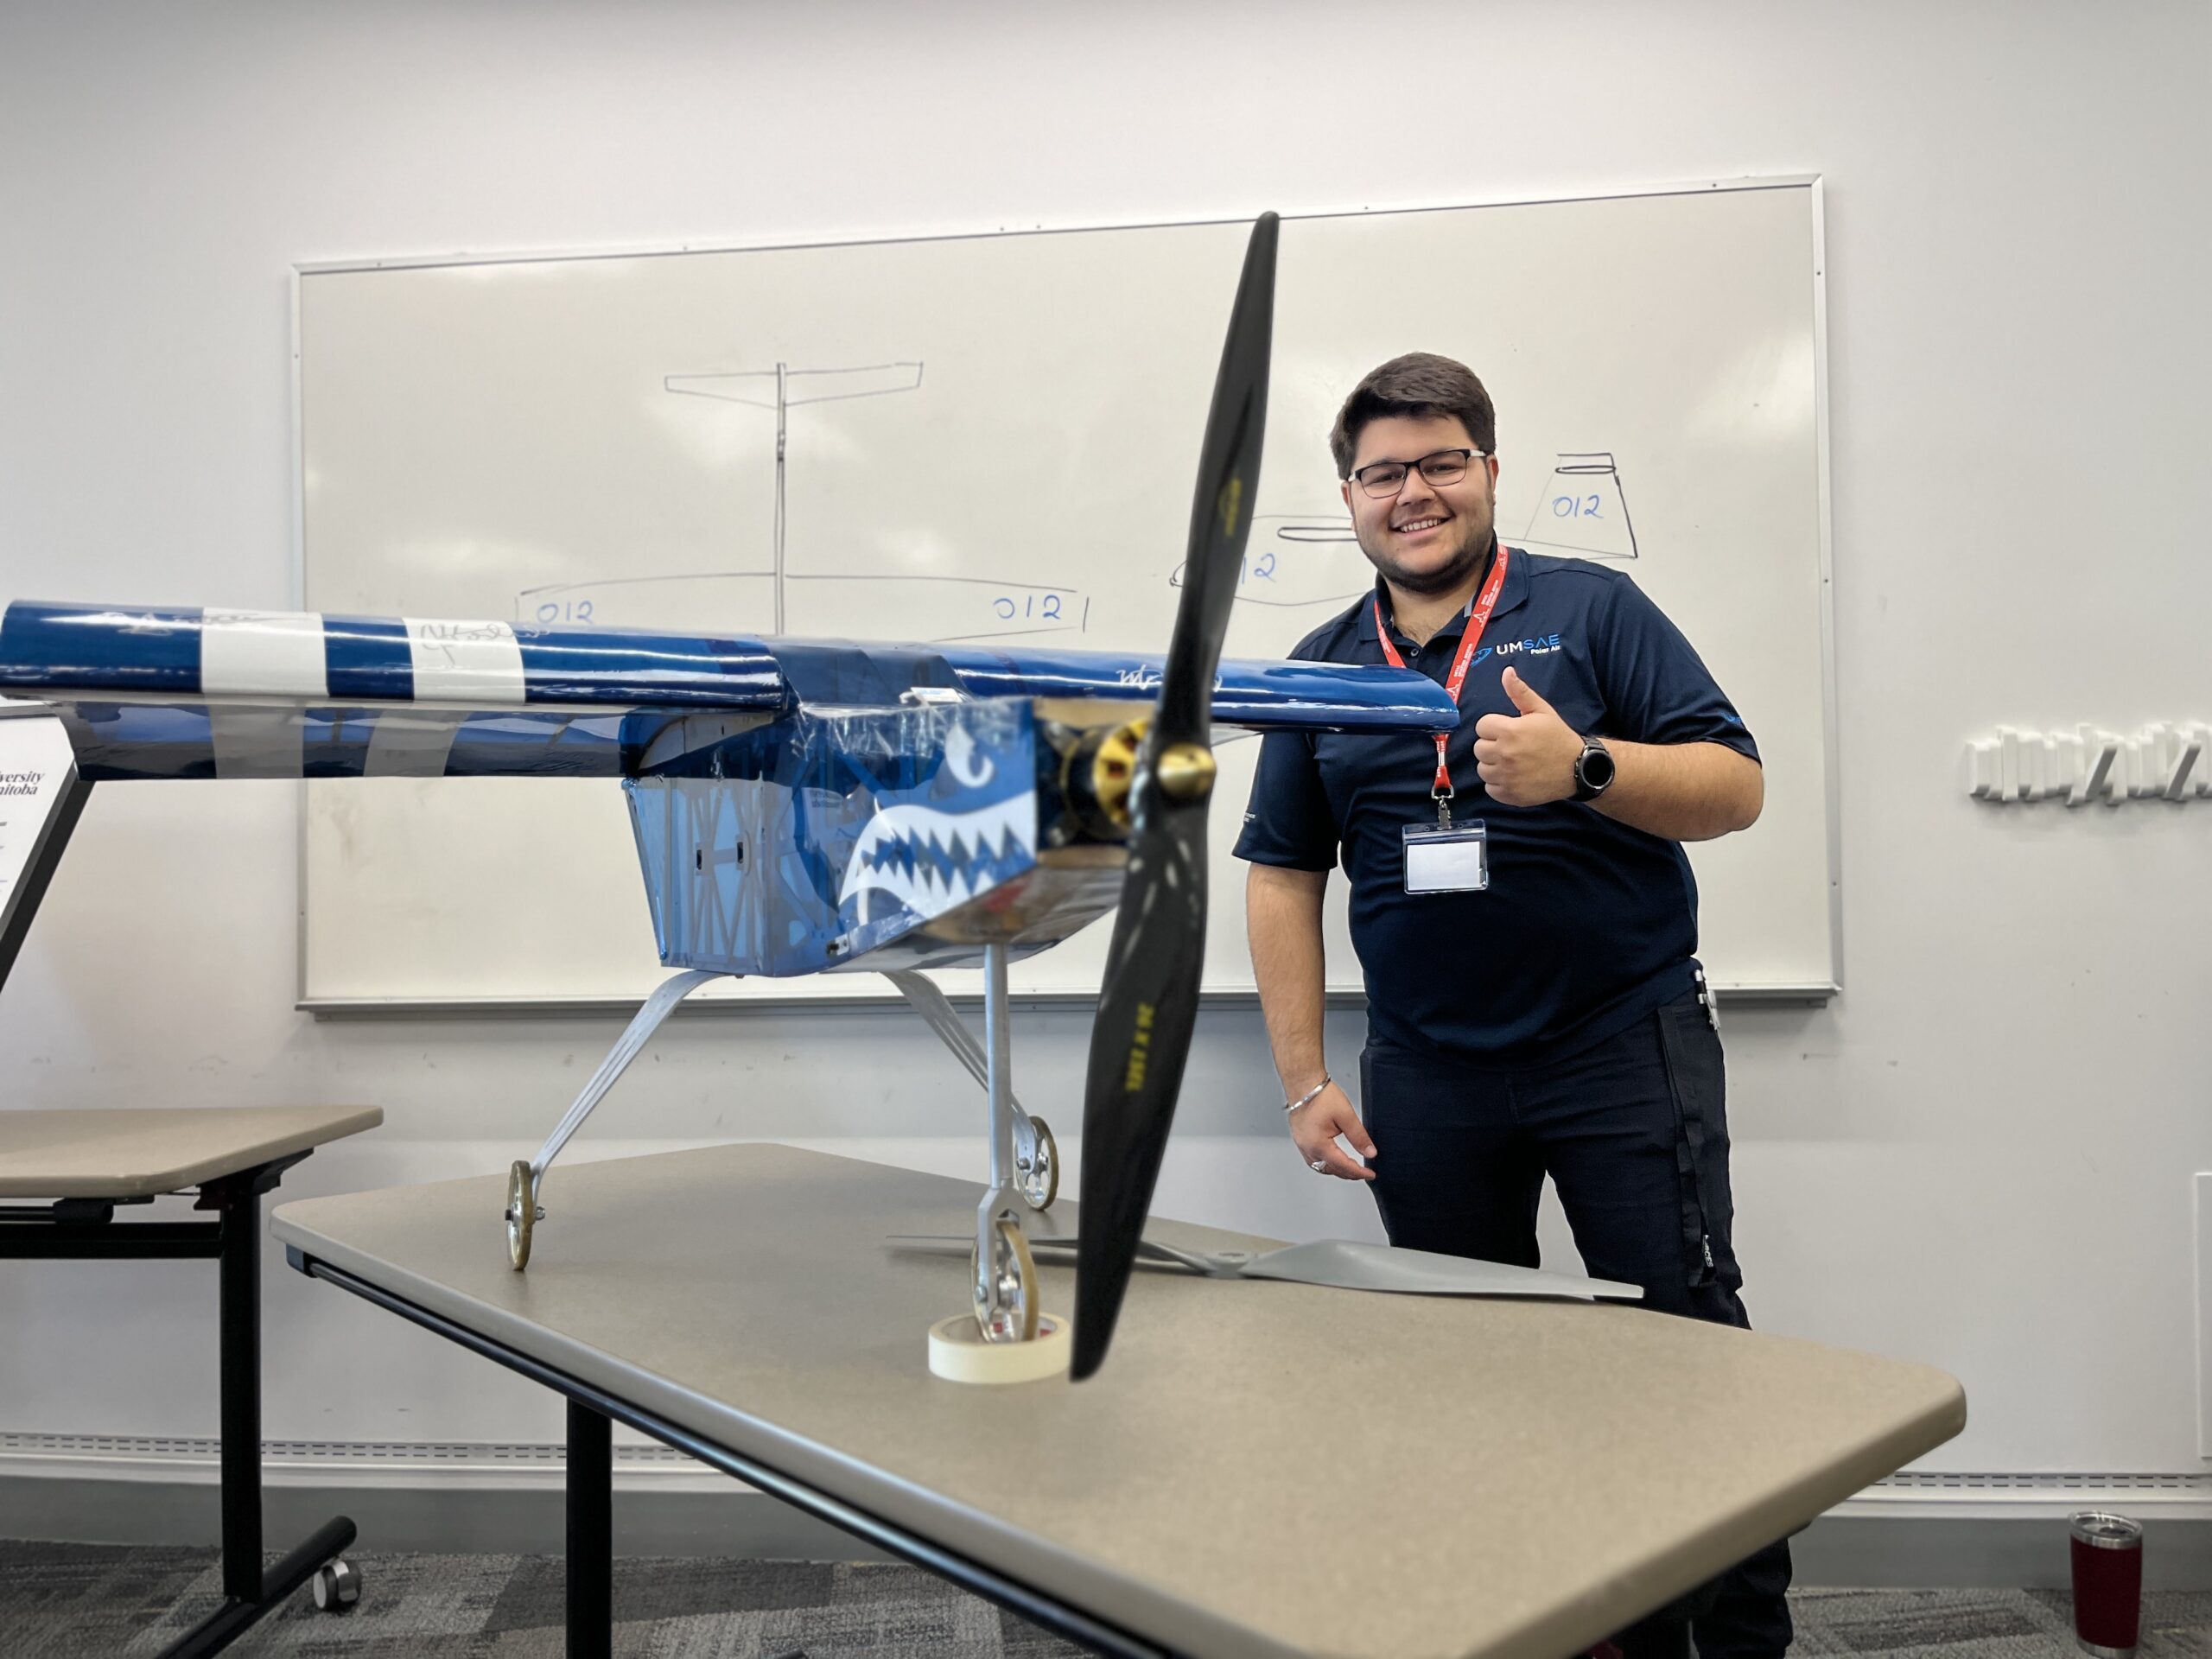 A student from the UM Price Faculty of Engineering SAE Aero team stands behind the team's winning design, giving thumbs-up